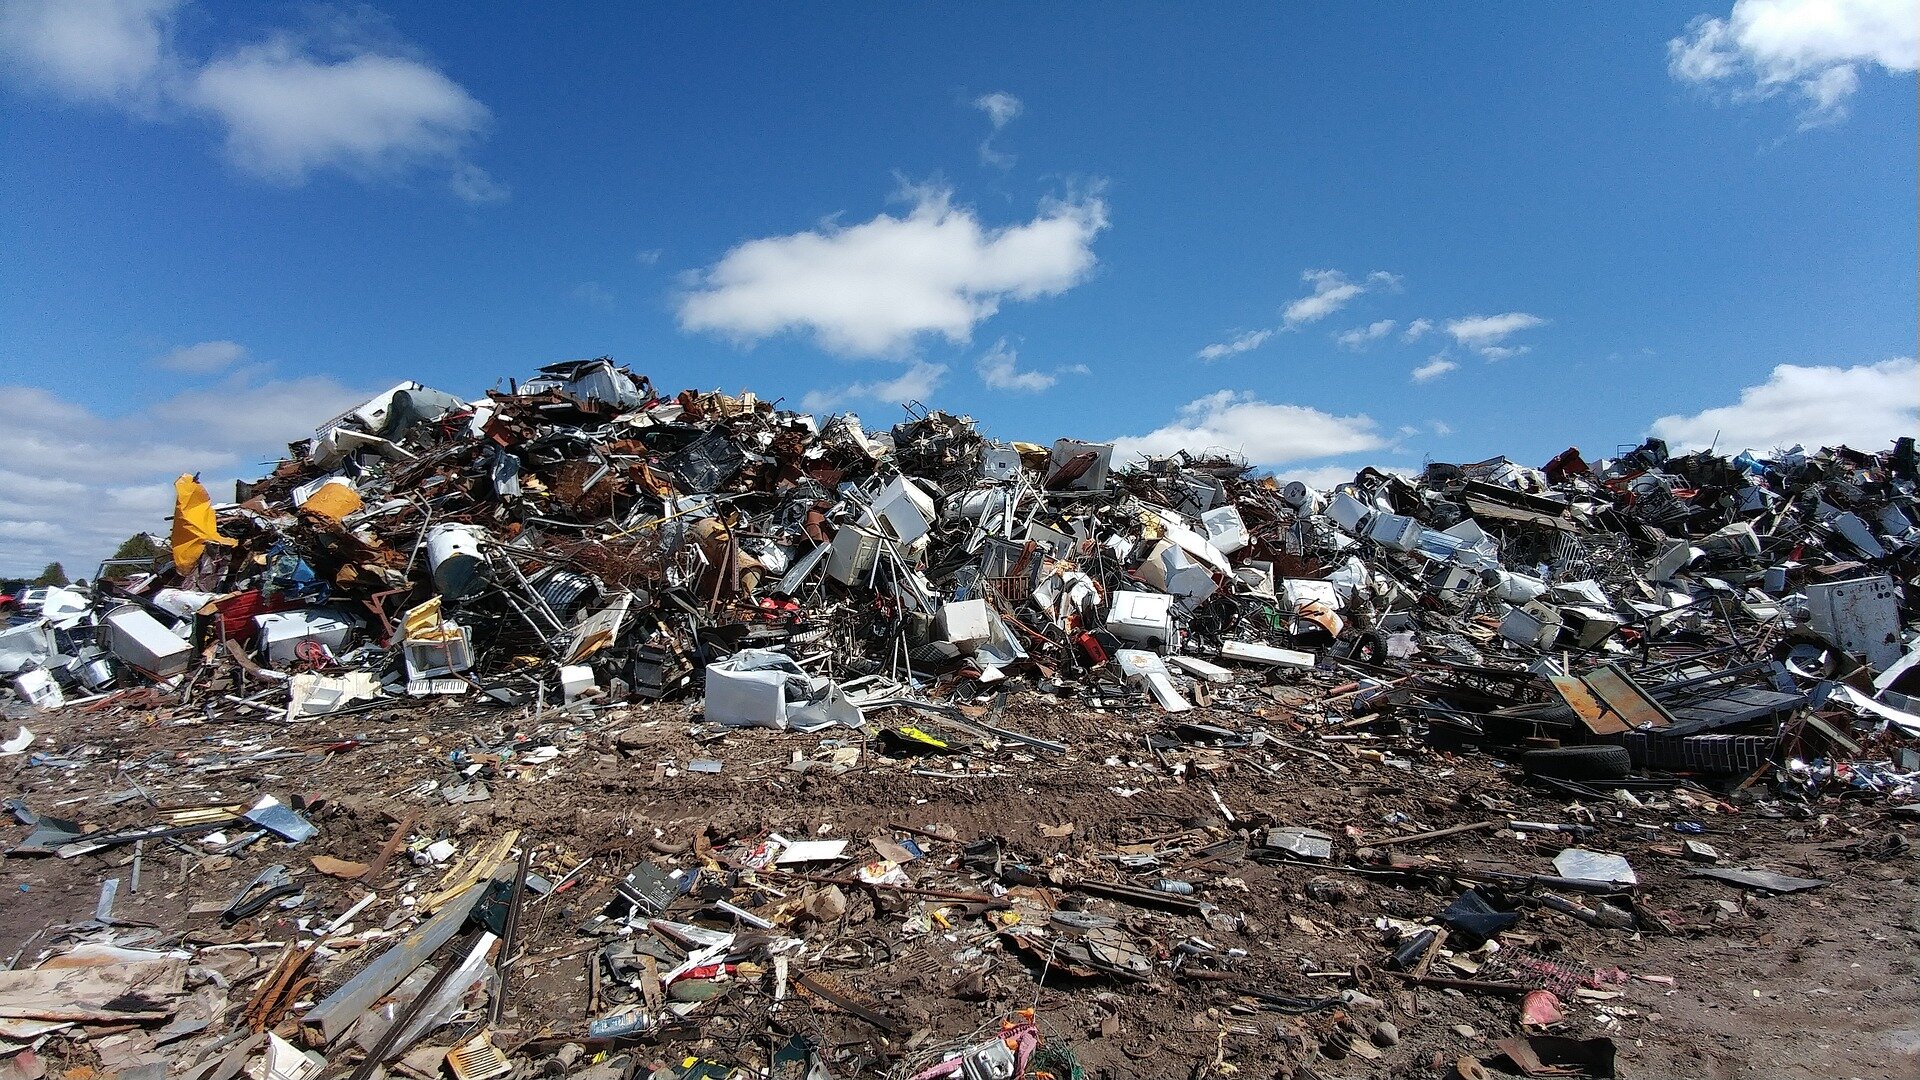 Landfill study shows flawed detection methods, higher methane emissions in Illinois, other states